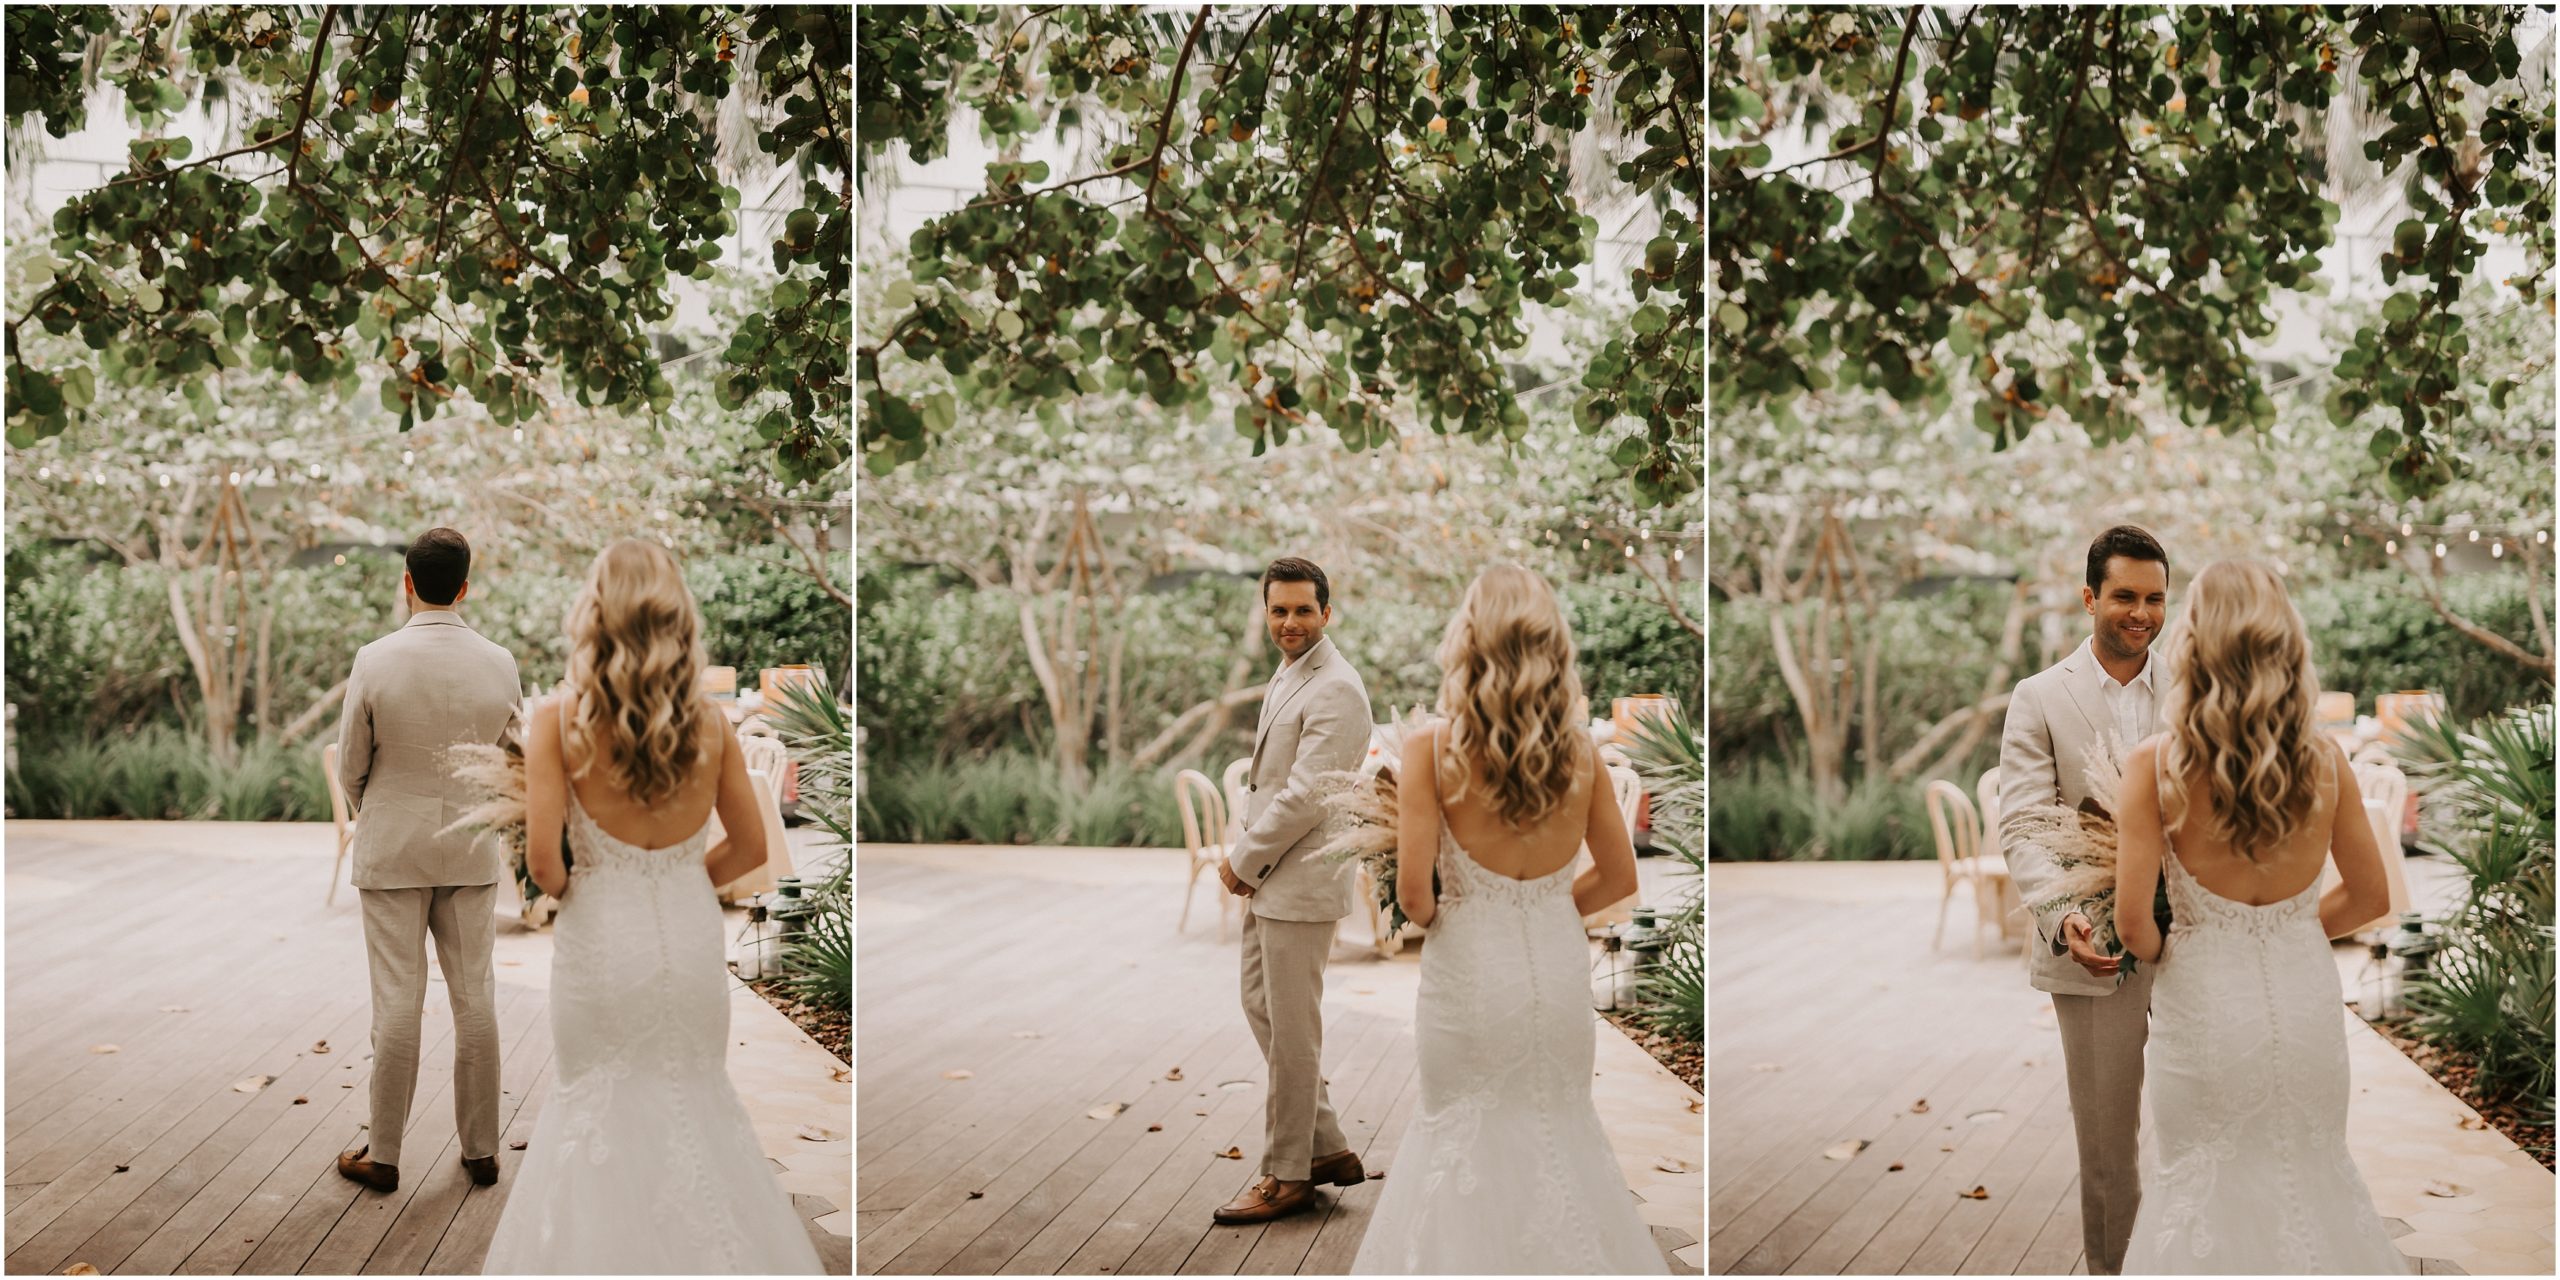 A private first look can be so special. Jade & Corey chose to do a first look with each other before the ceremony. Despite being there with my hubby, this couple felt and acted as if they were the only ones.